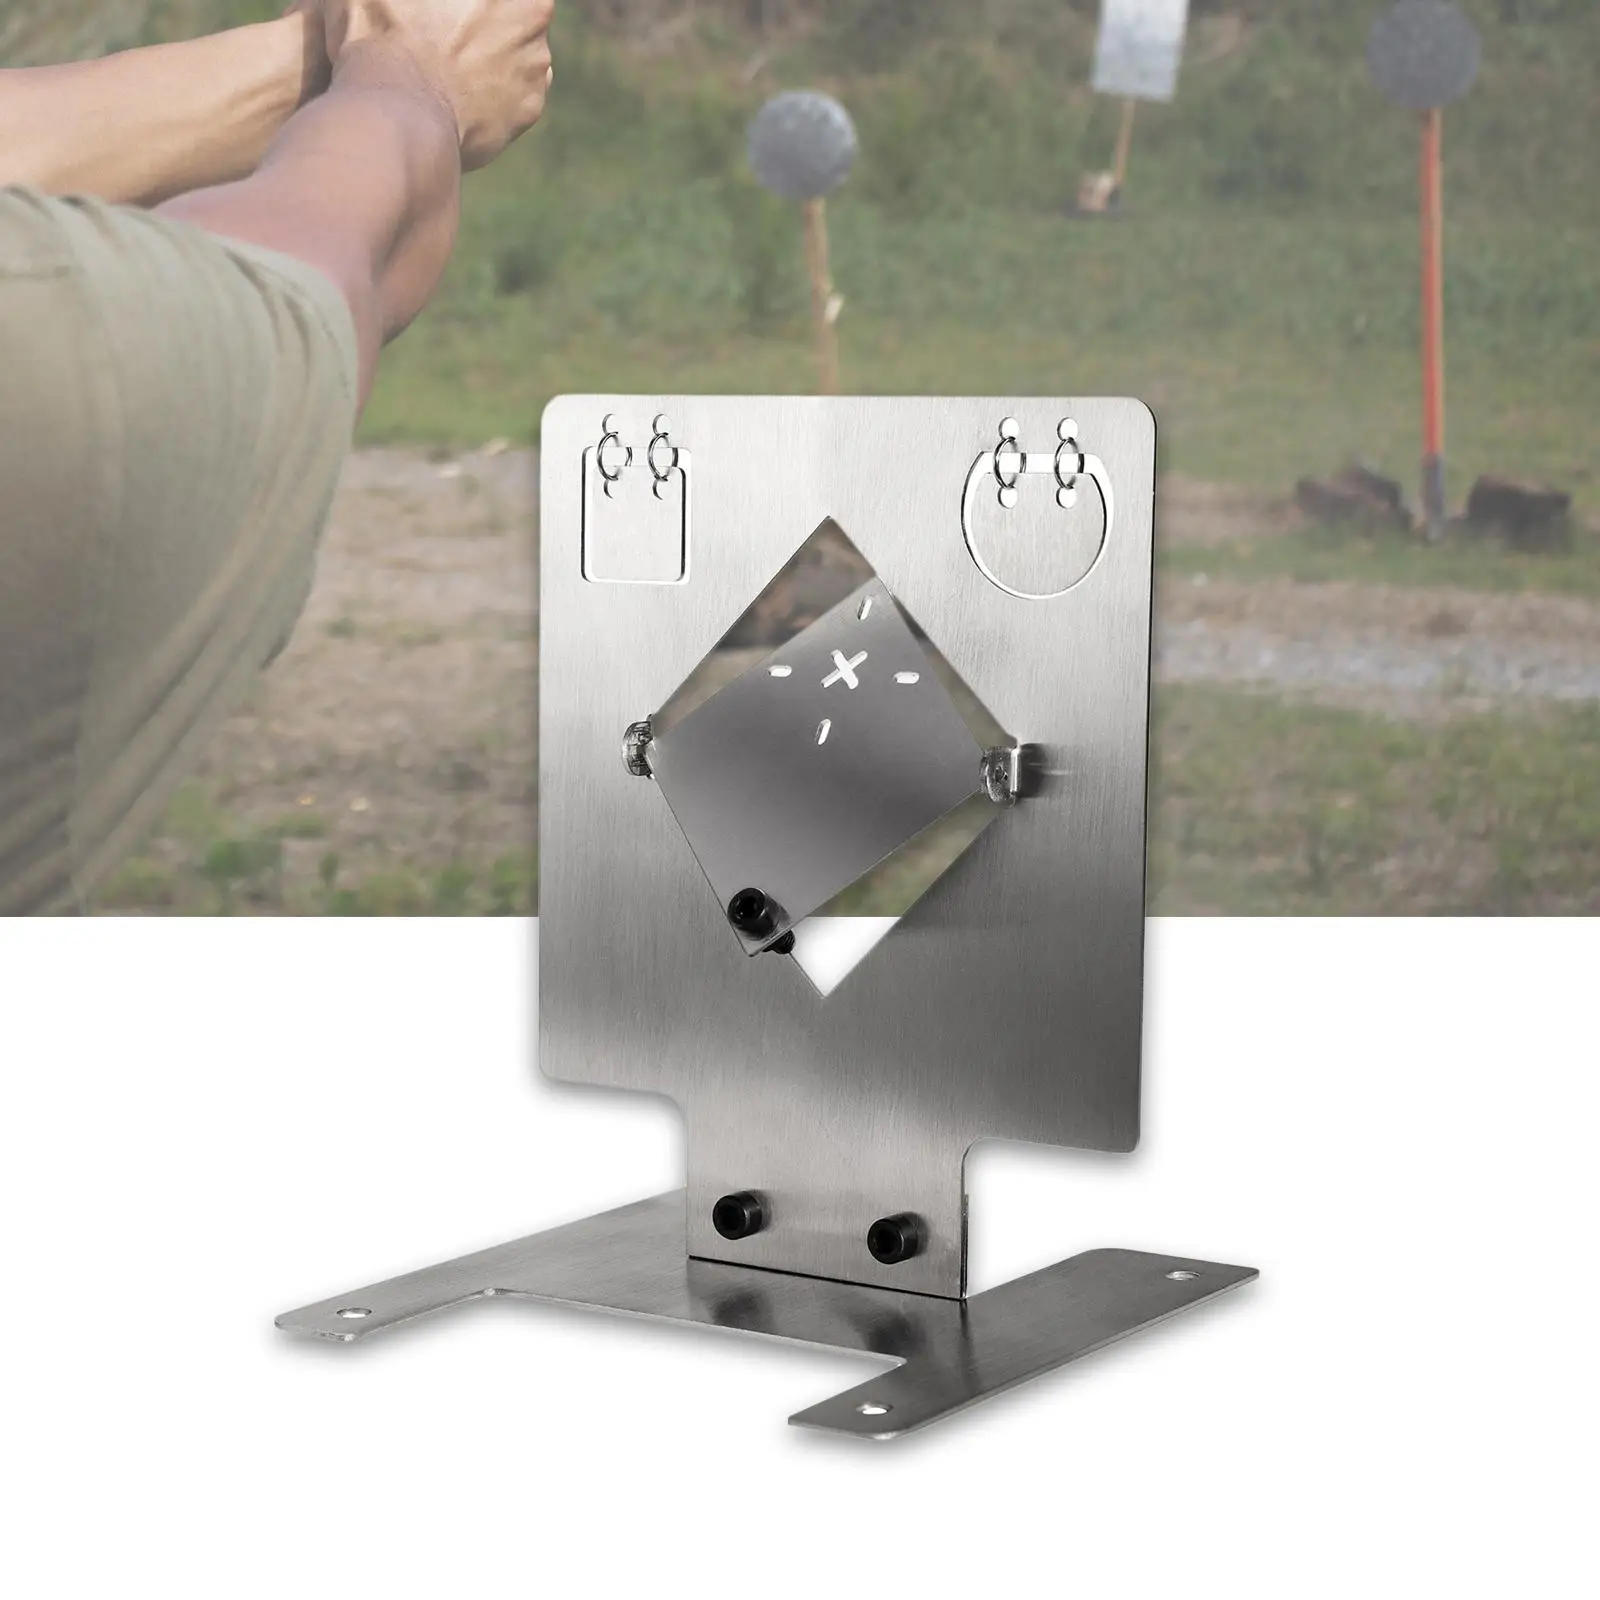 Stainless Steel Target Hanging Ring Design Strong Stable Metal Target Stand